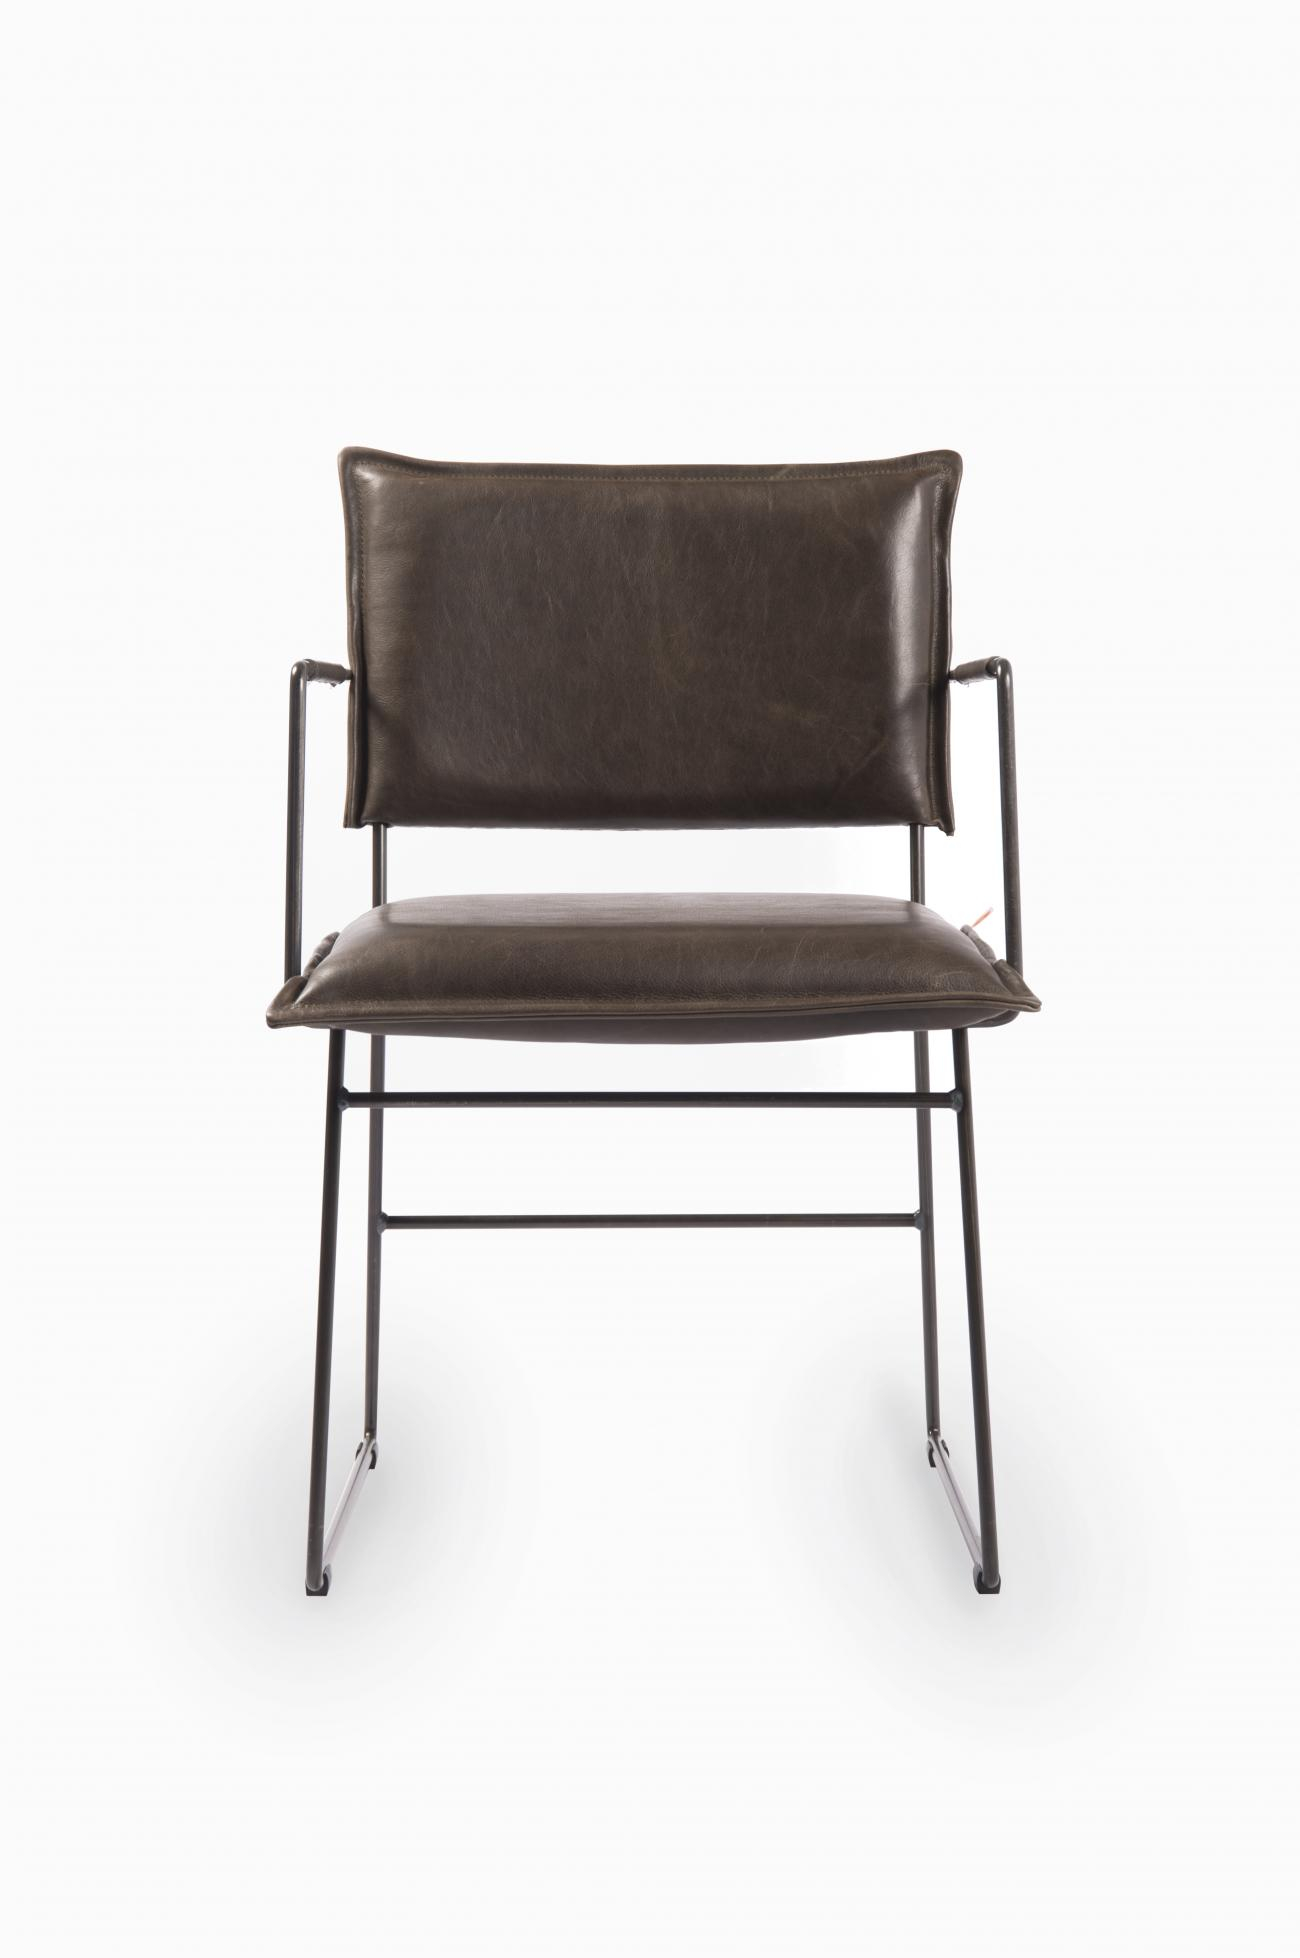 https://www.fundesign.nl/media/catalog/product/n/o/norman_diningchair_arm_luxor_grey_front.jpg